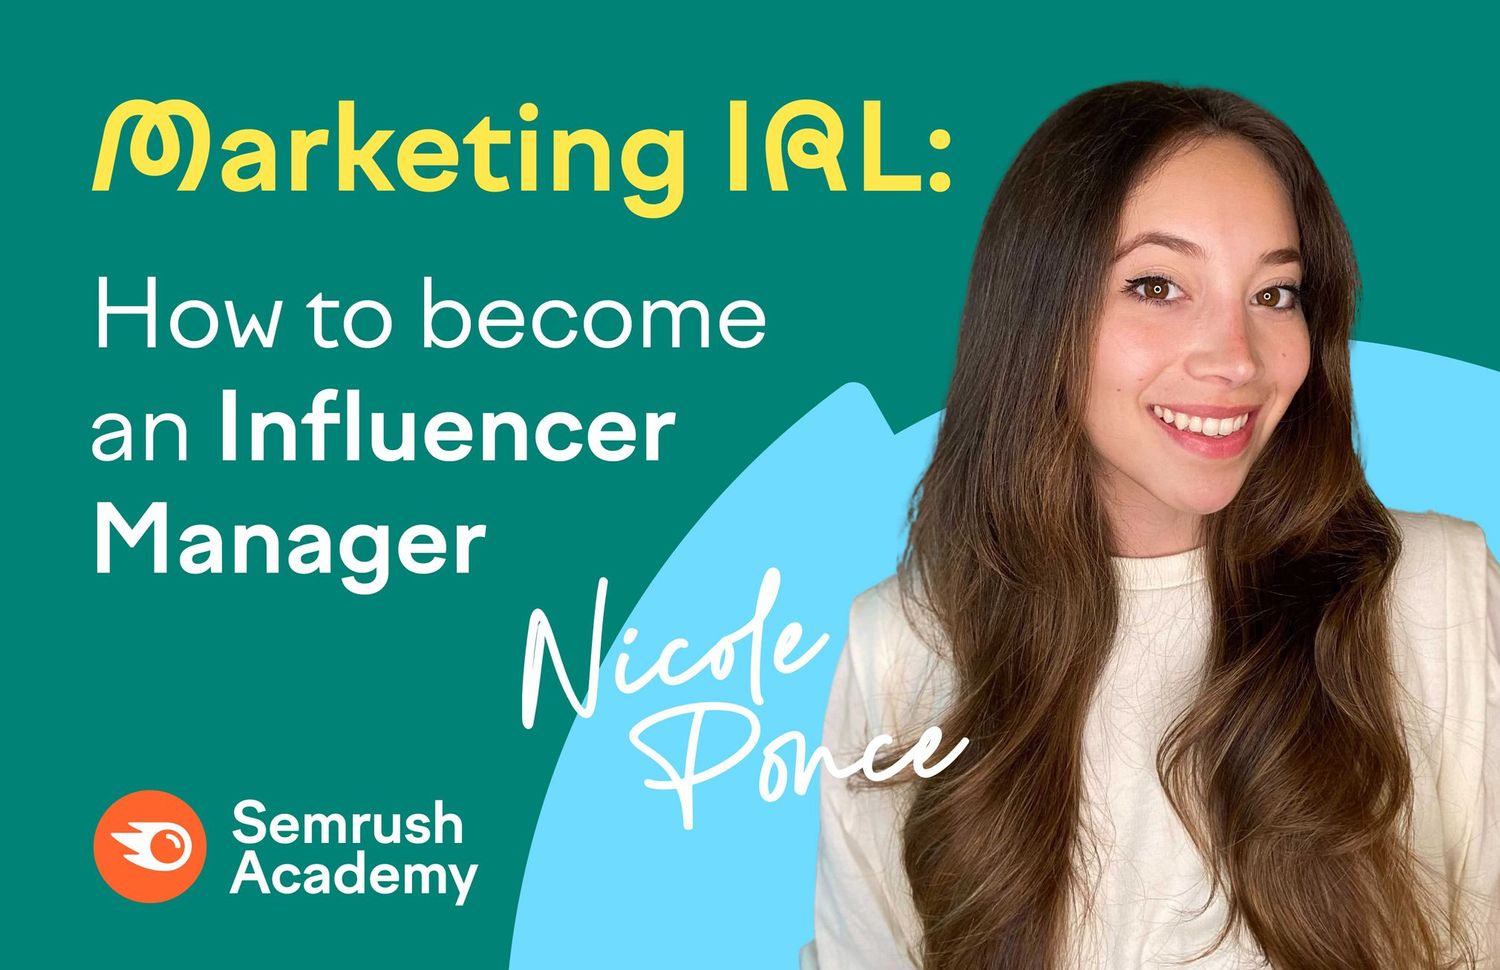 Story of an Influencer Marketing Manager